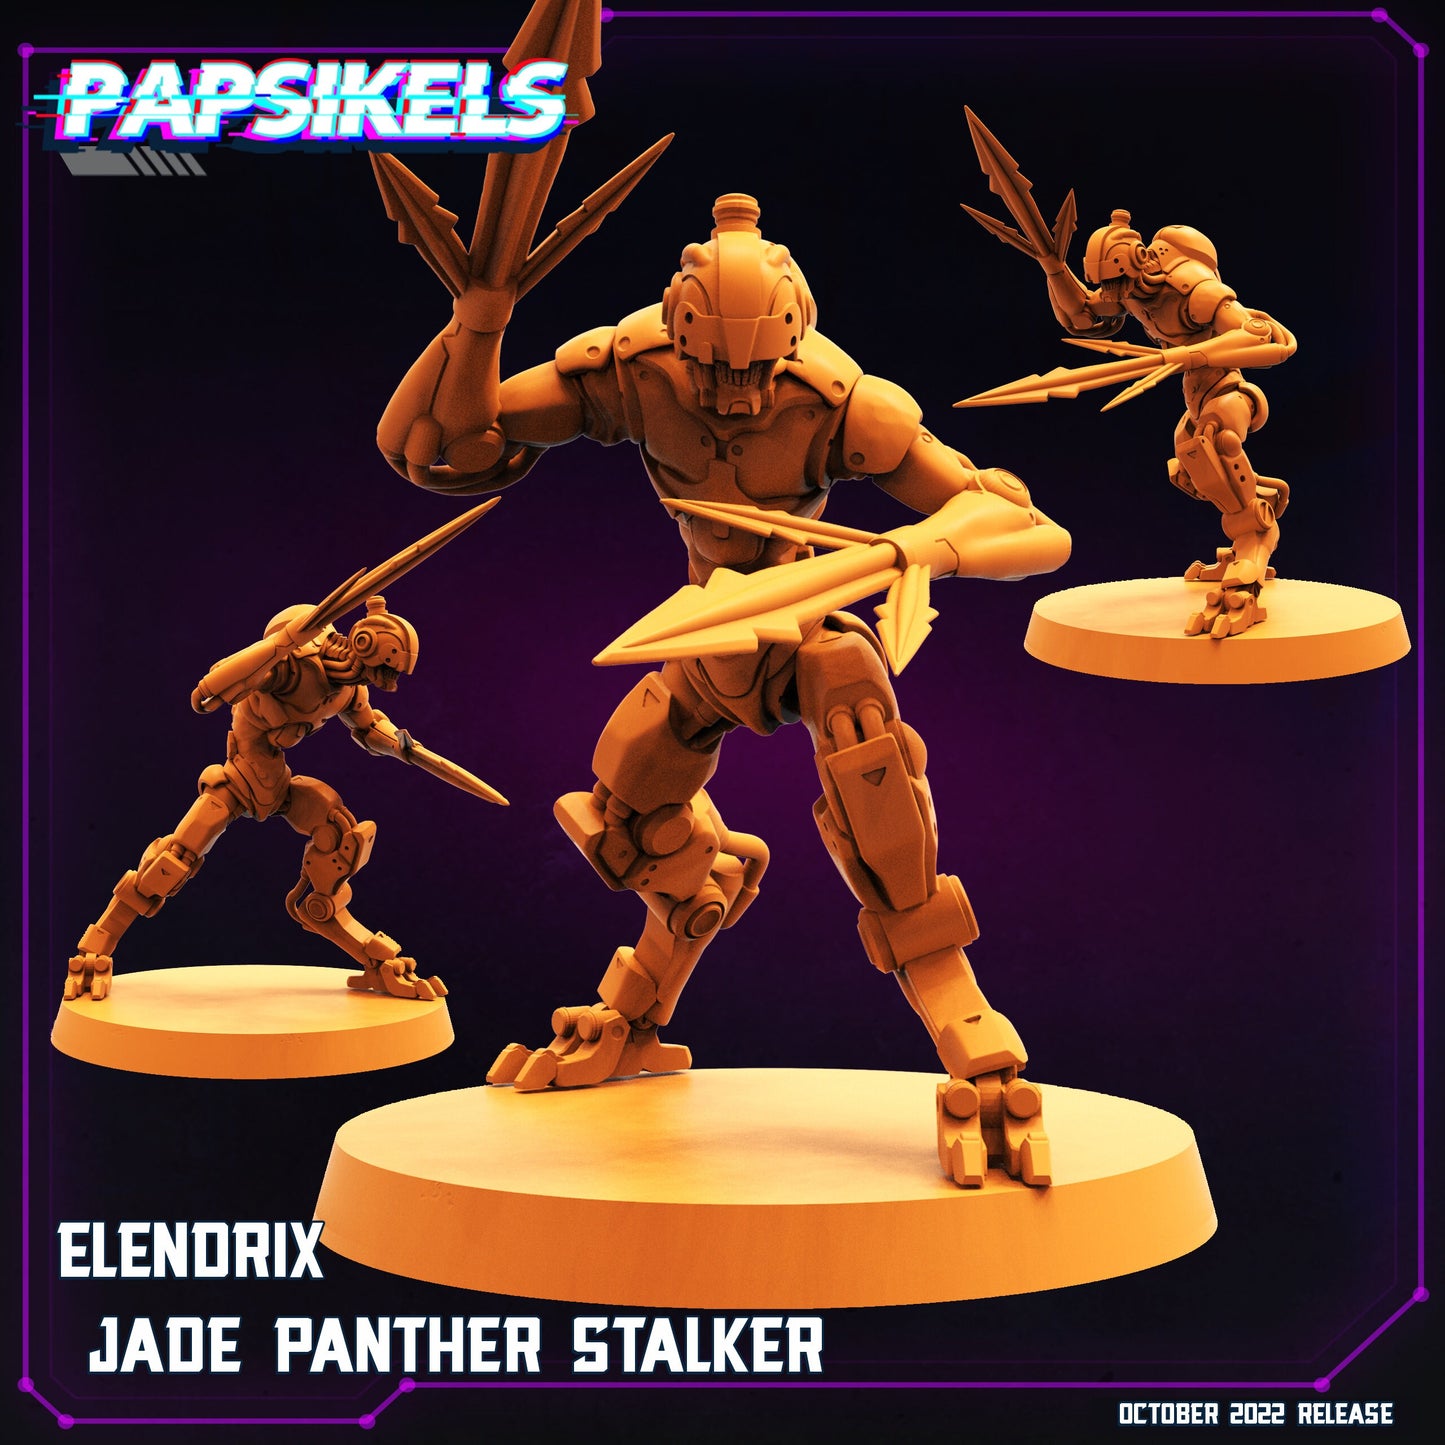 Elendrix - Jade Panther Stalker (sculpted by Papsikels)